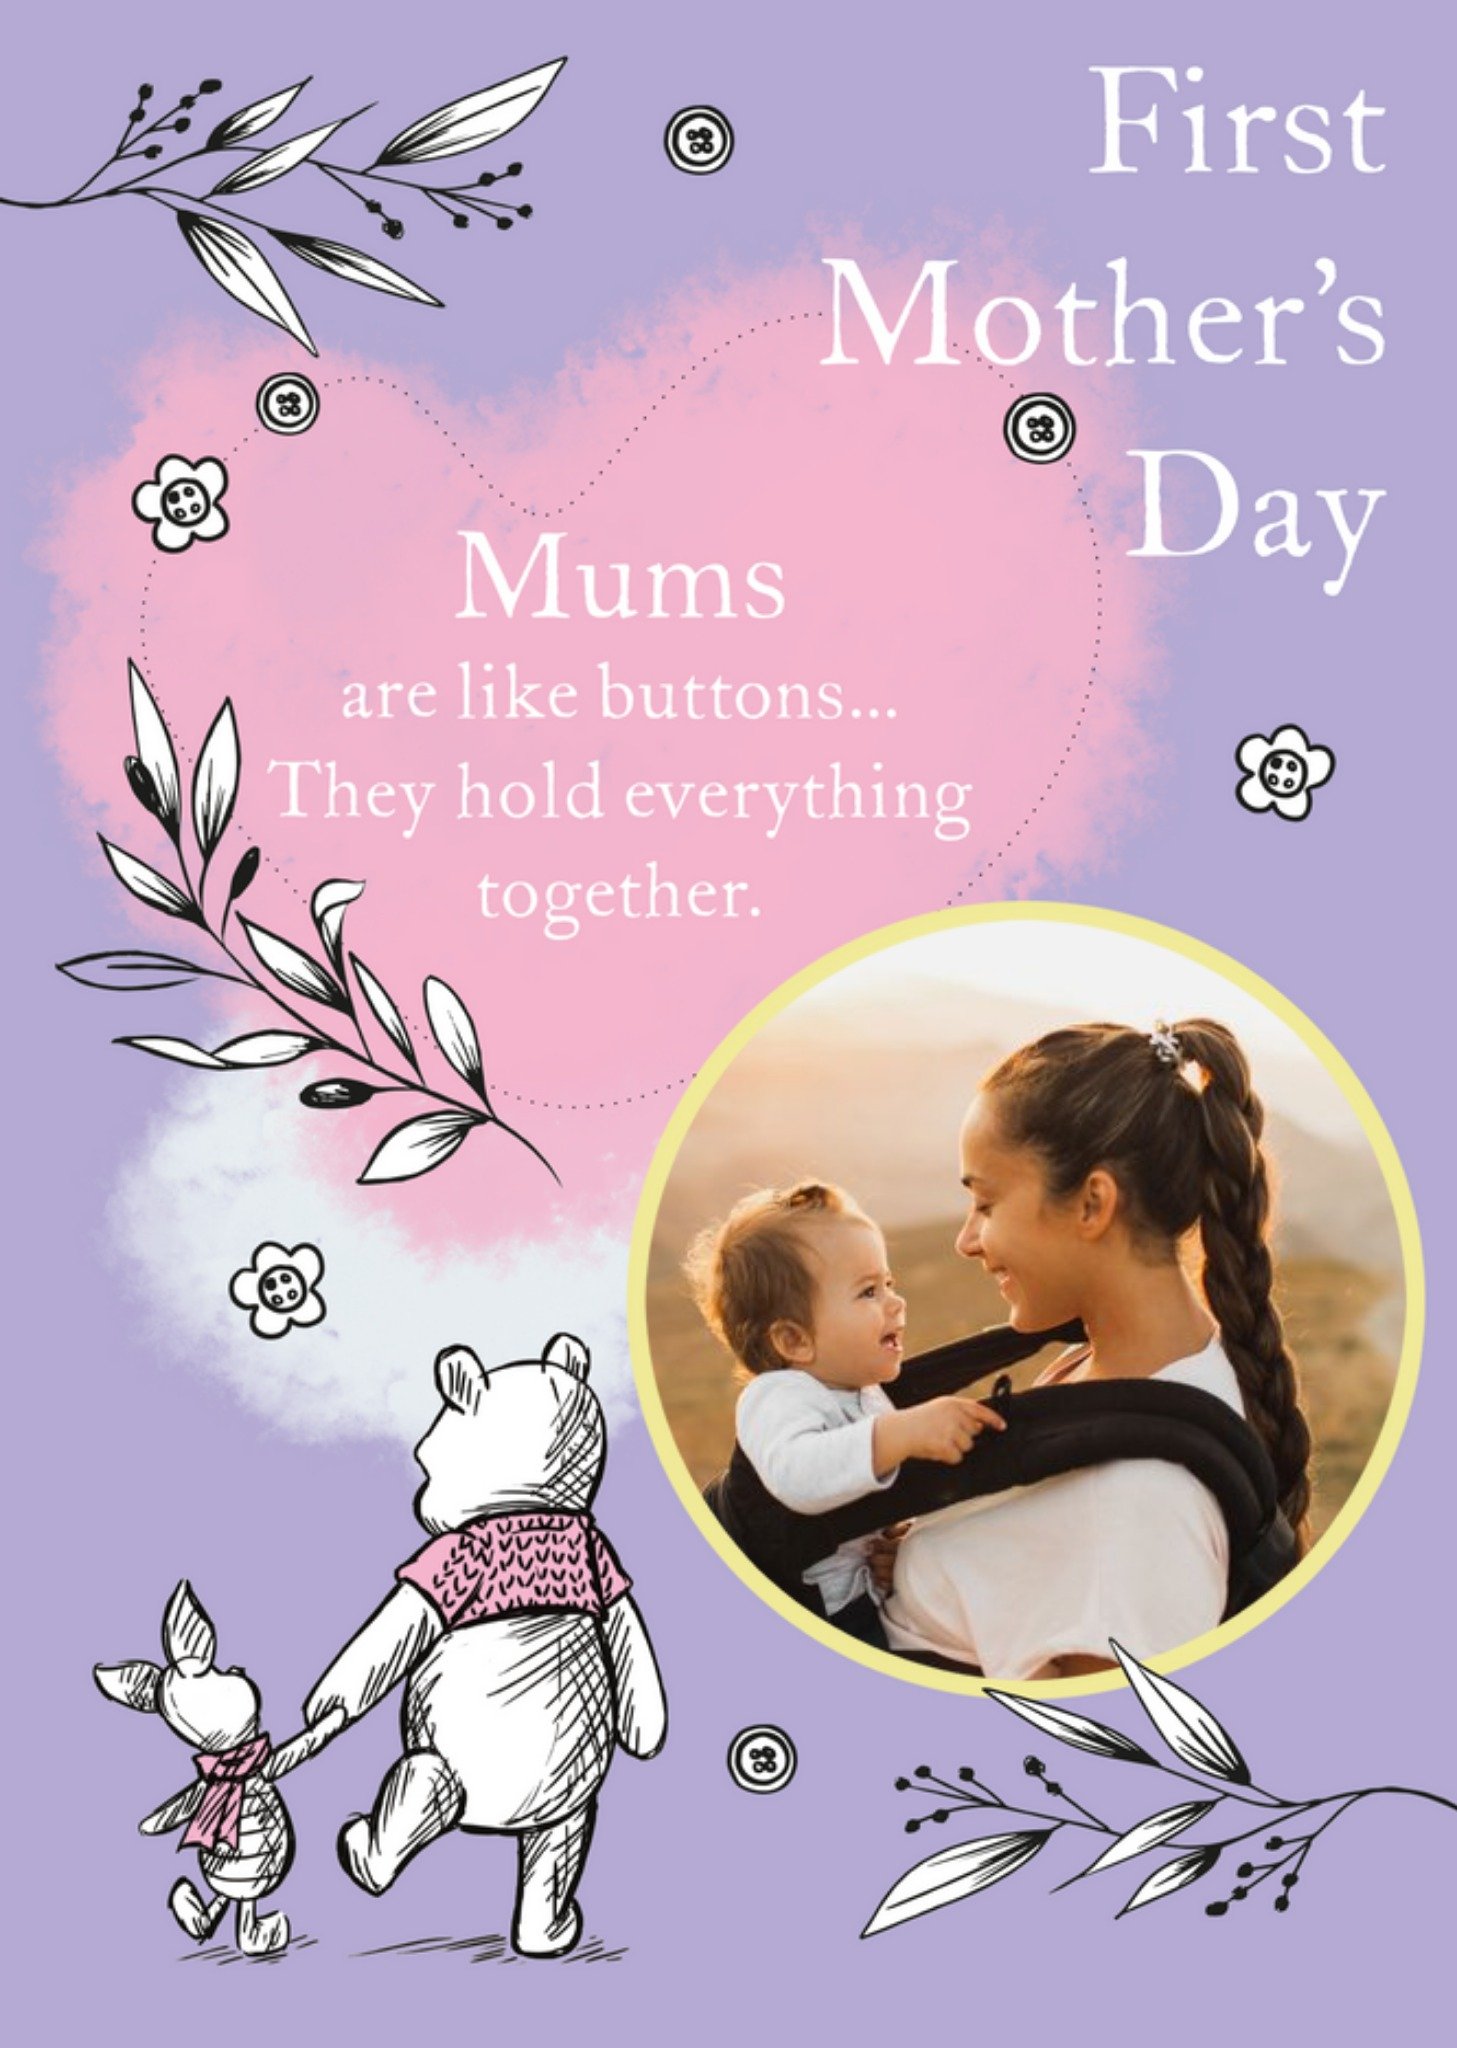 Winnie The Pooh Mum's Are Like Buttons Mother's Day Photo Upload Card, Large